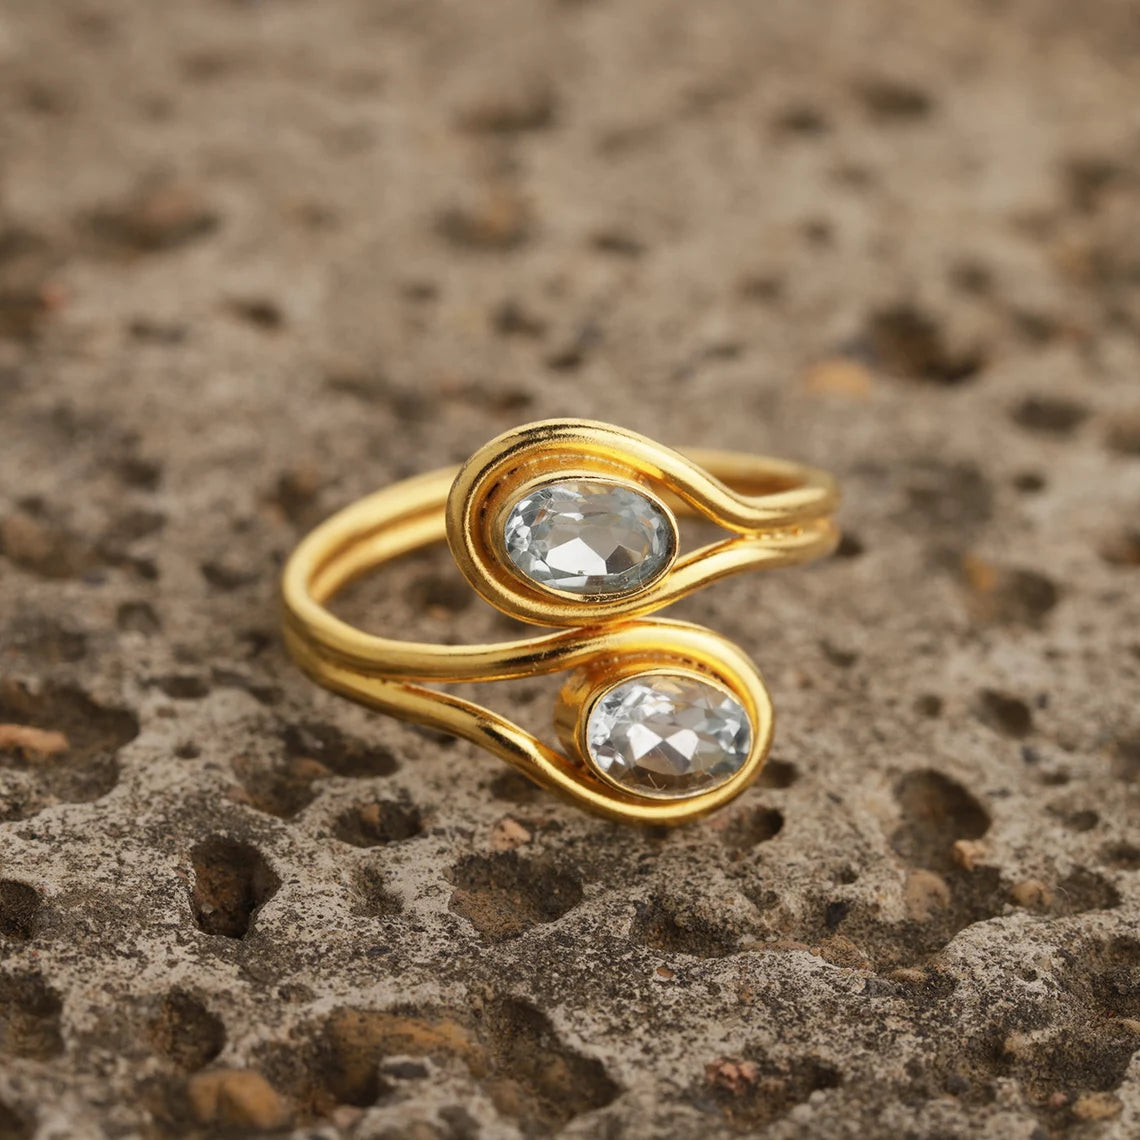 Dual Stone Ring- 18k Gold Vermeil - 925 Sterling Silver - Oval Blue Topaz - Adjustable Ring